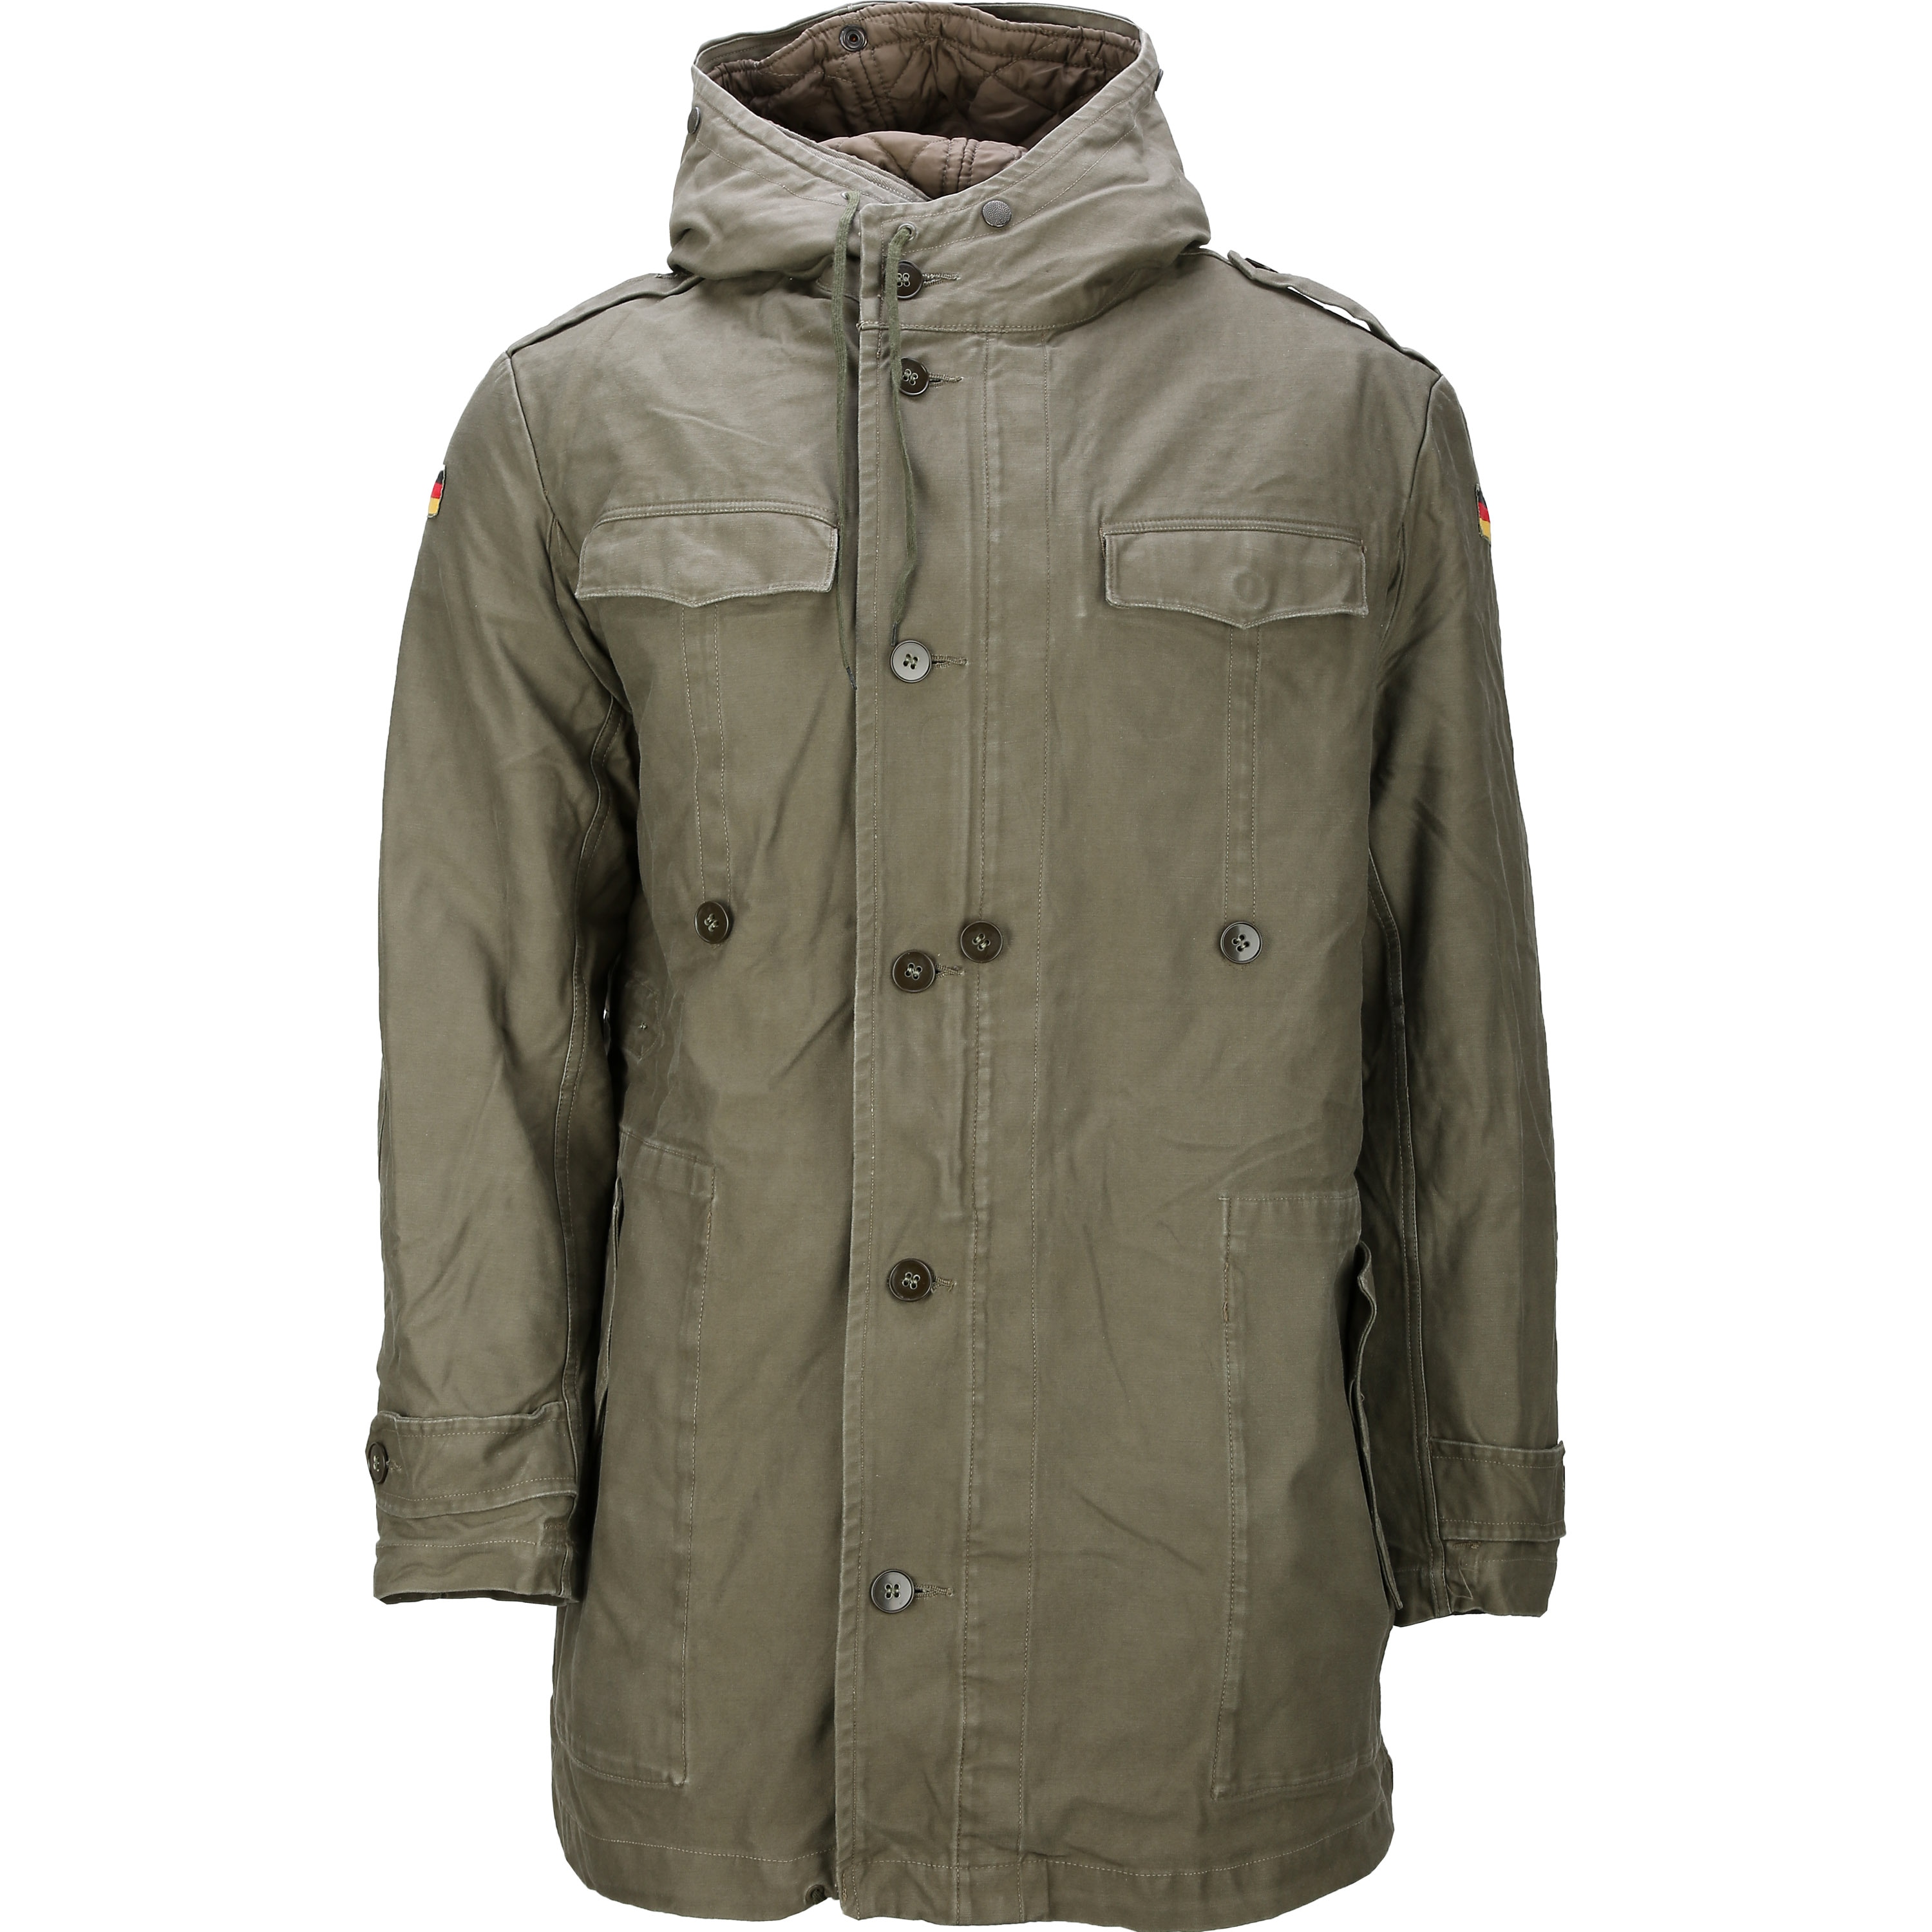 BW Military Parka Used 2nd Quality olive